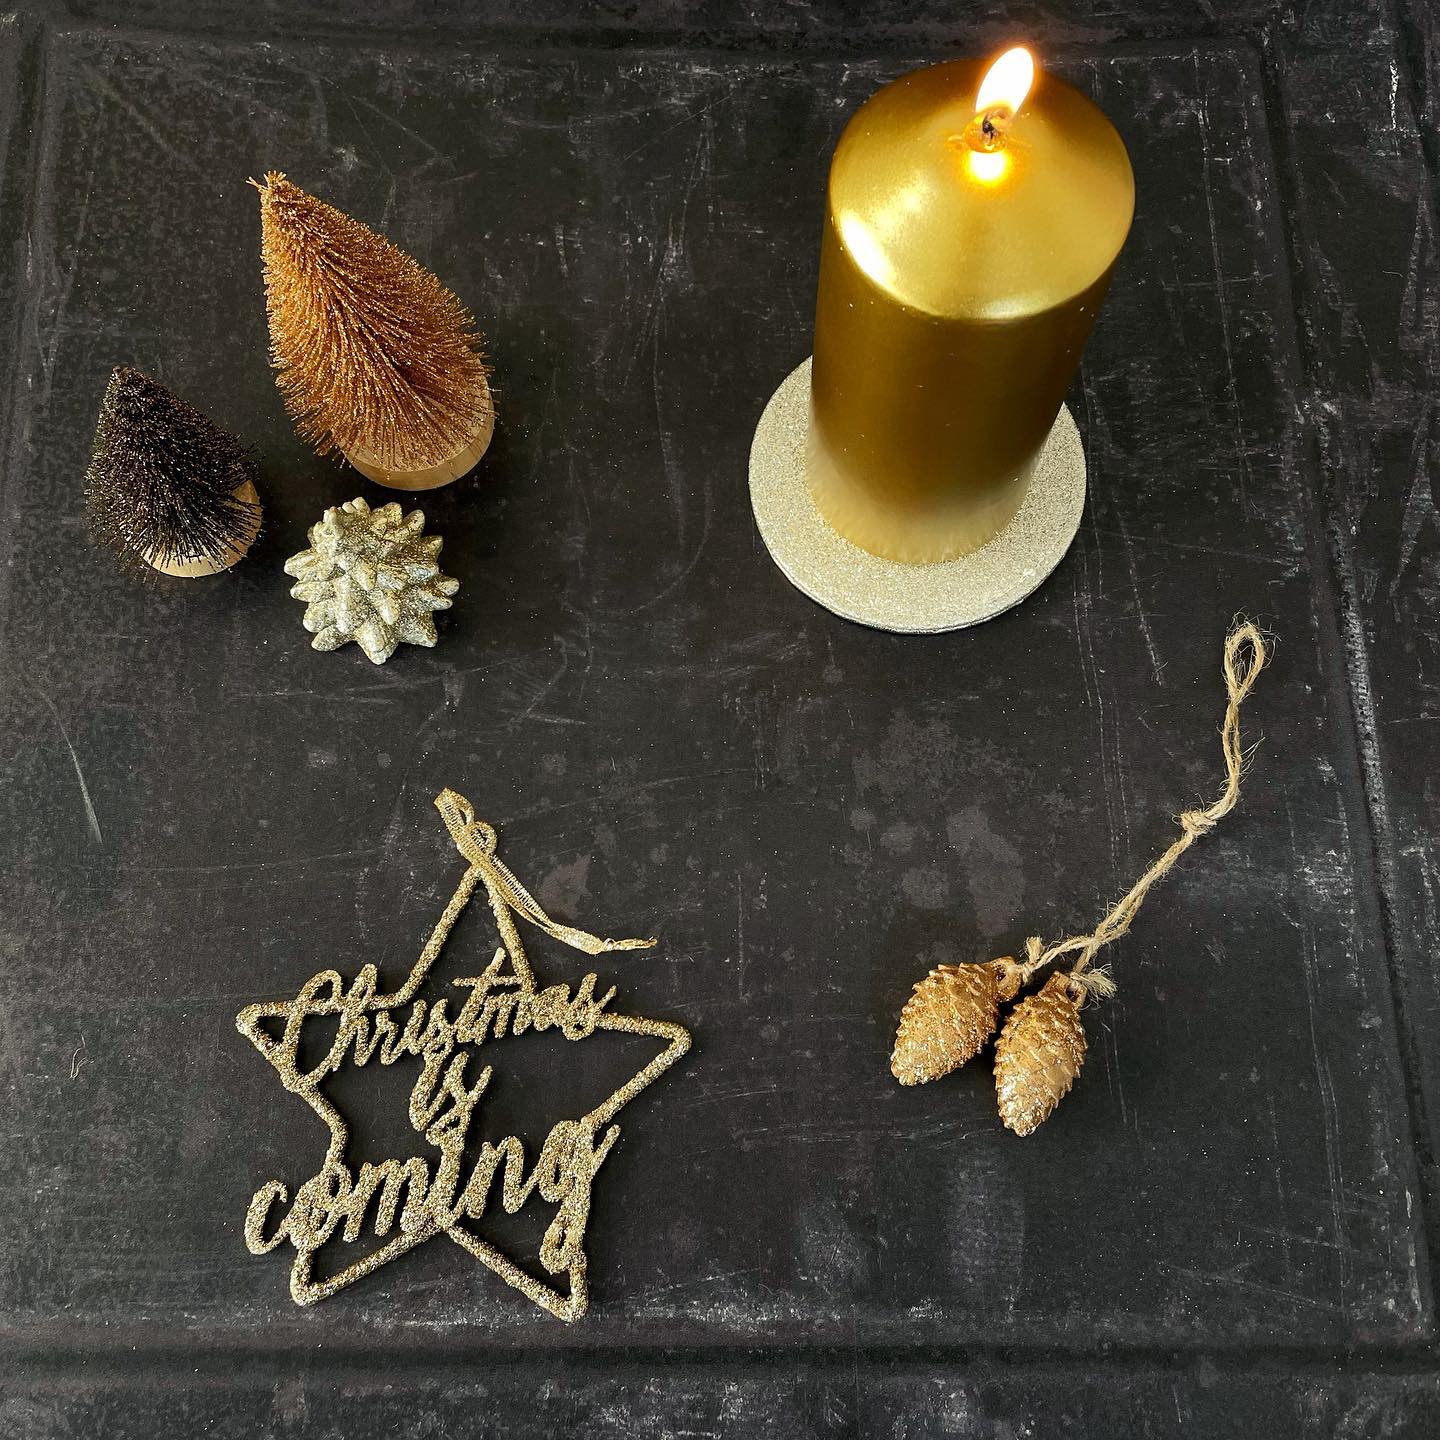 2nd of December..... Christmas is coming! Starting to feel more festive, and sharing some golden bits and pieces today